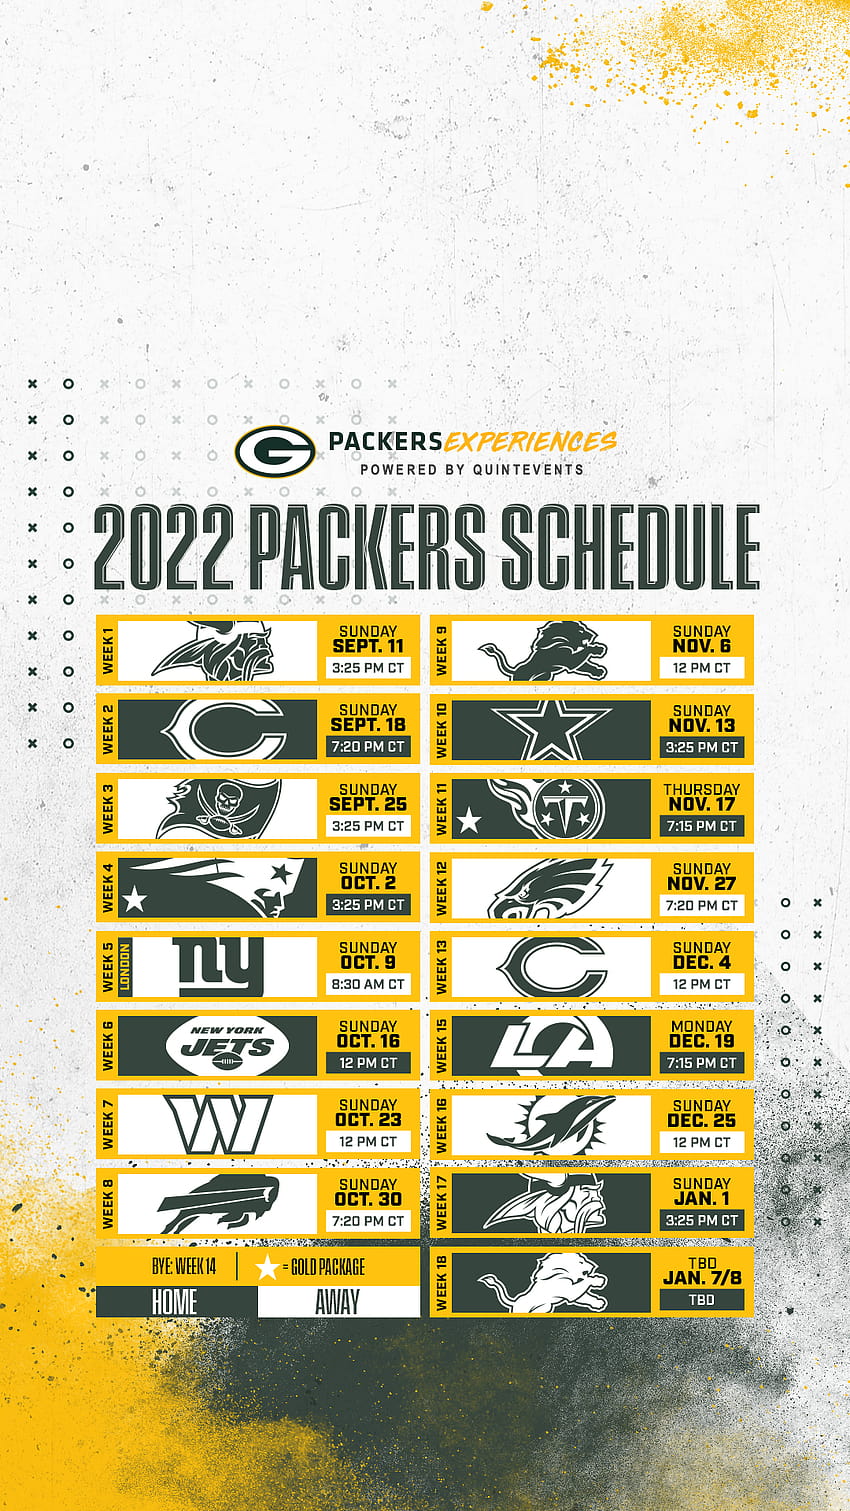 Schedule wallpaper for the Green Bay Packers Regular Season 2018 Central  European Time Made by Tobler Ge  Fantasy basketball Green bay packers  Injured players